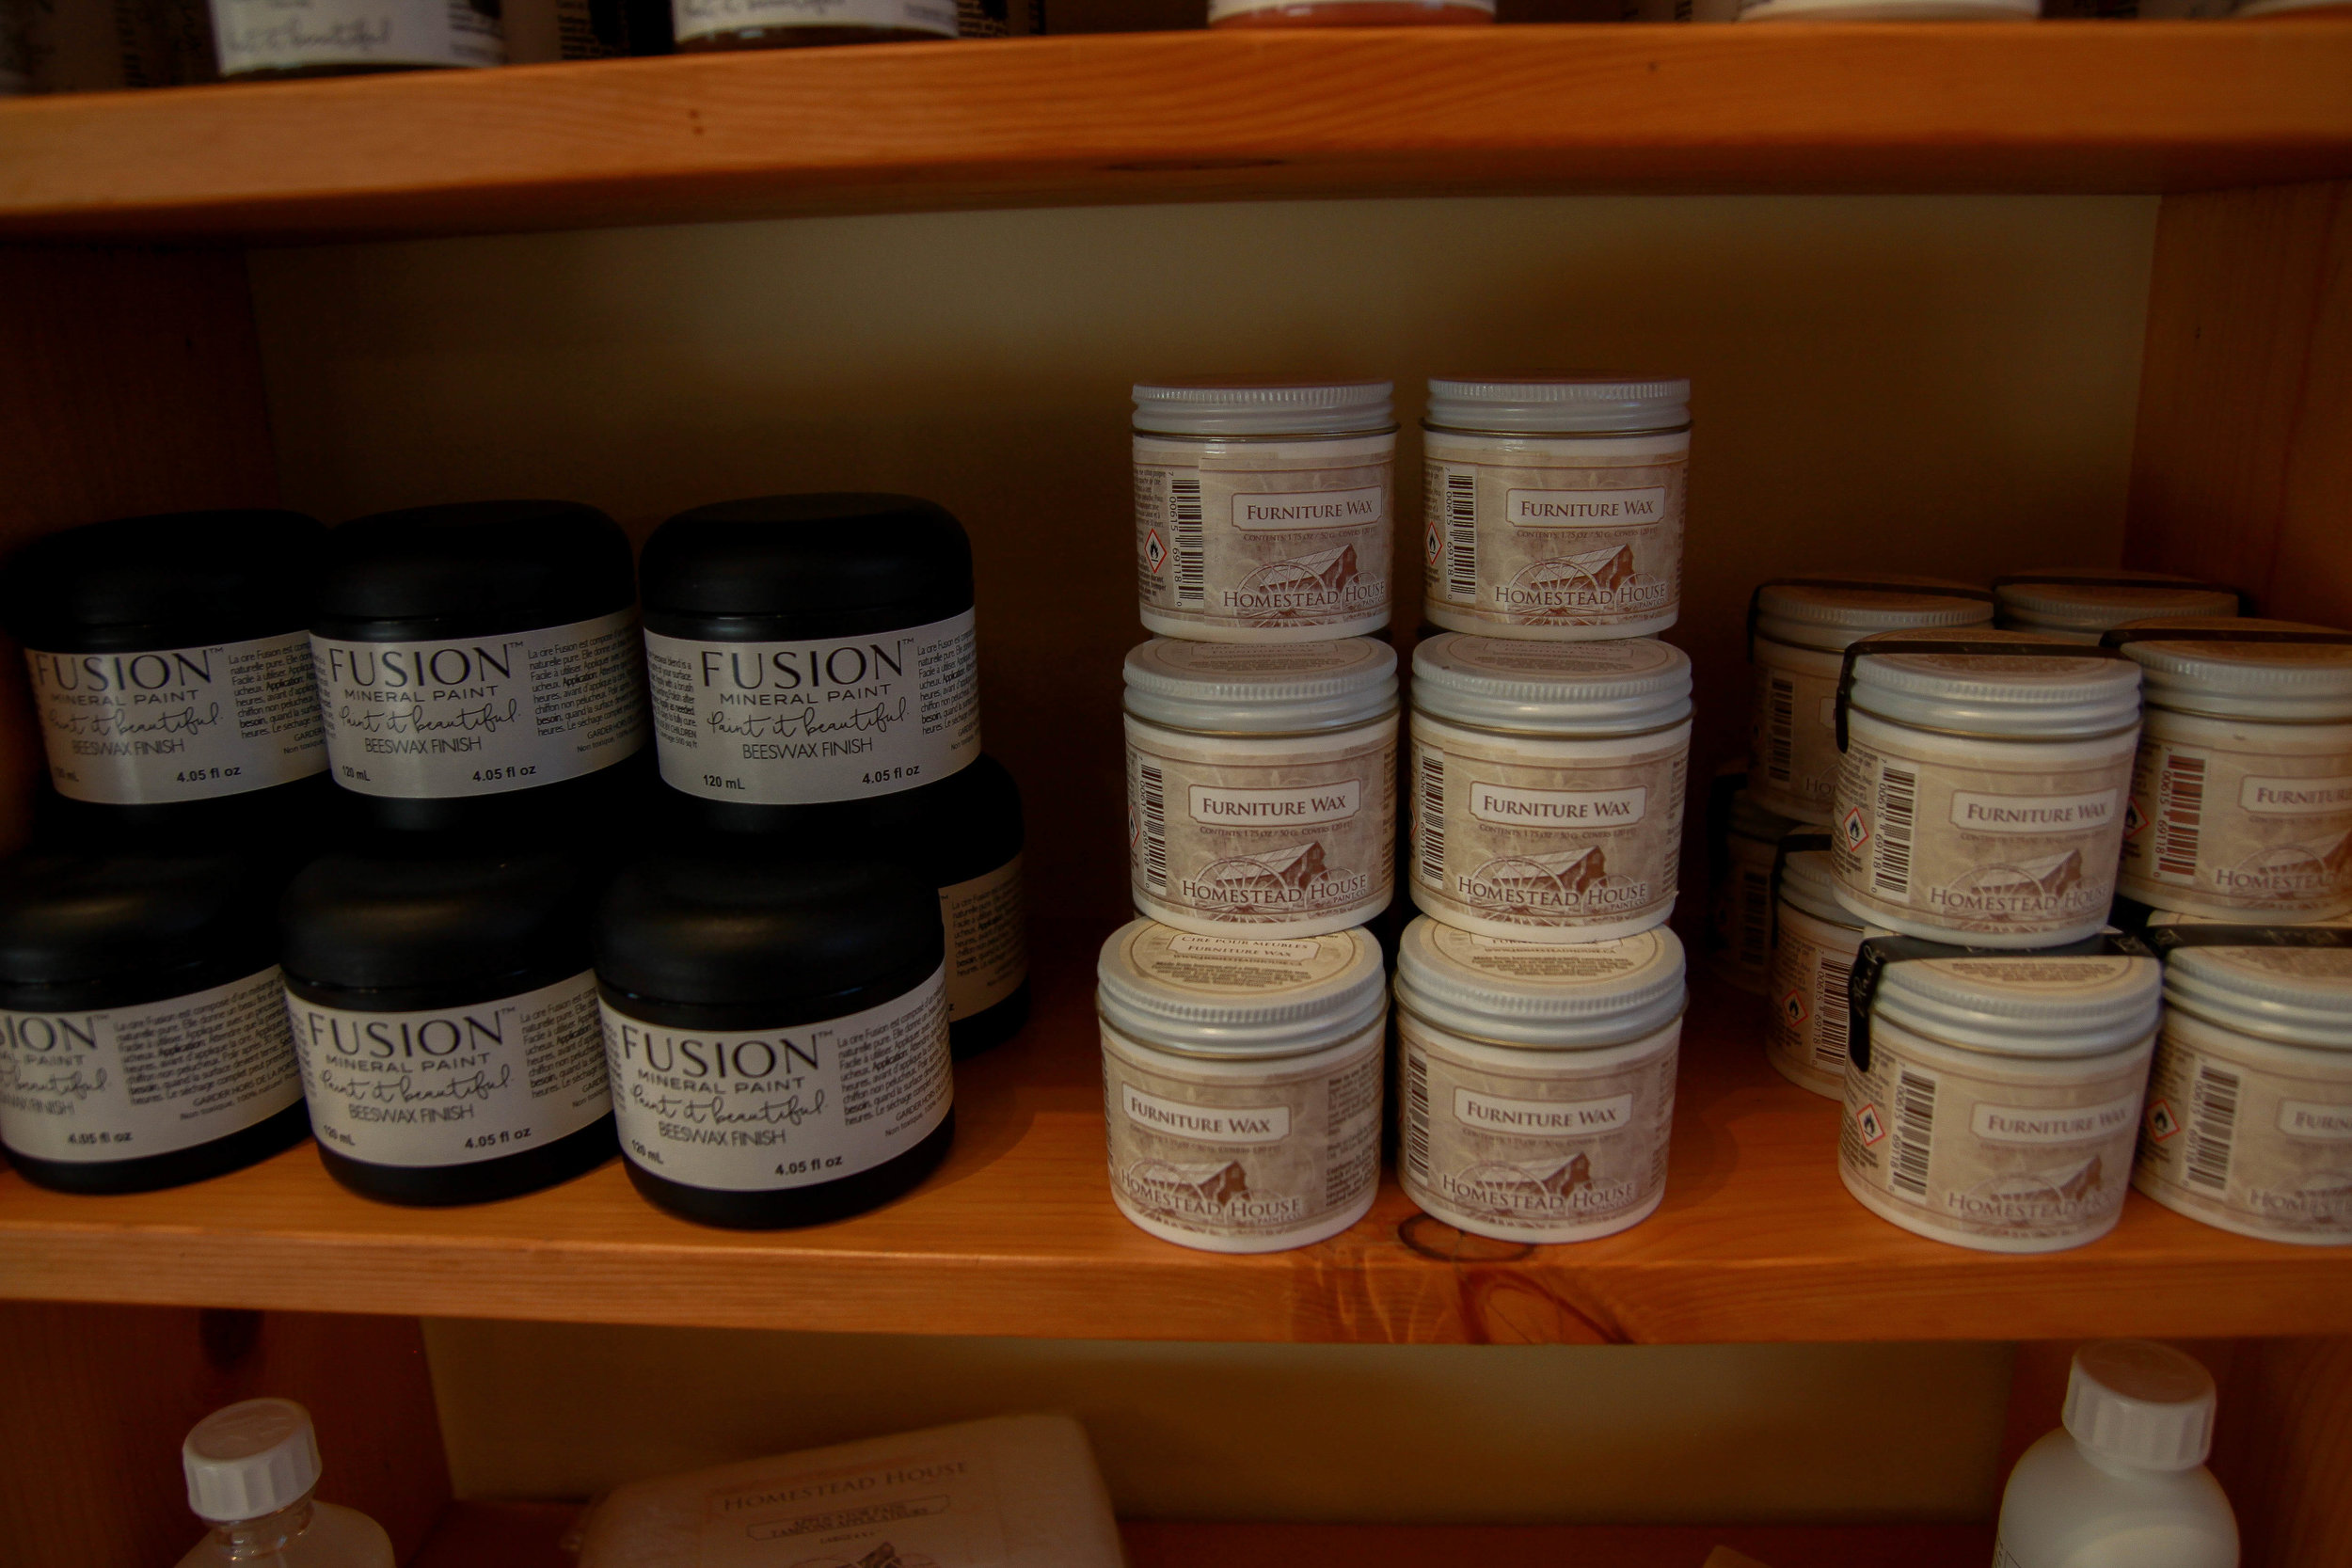 Fusion Mineral Products at House of Hope Vanderhoof